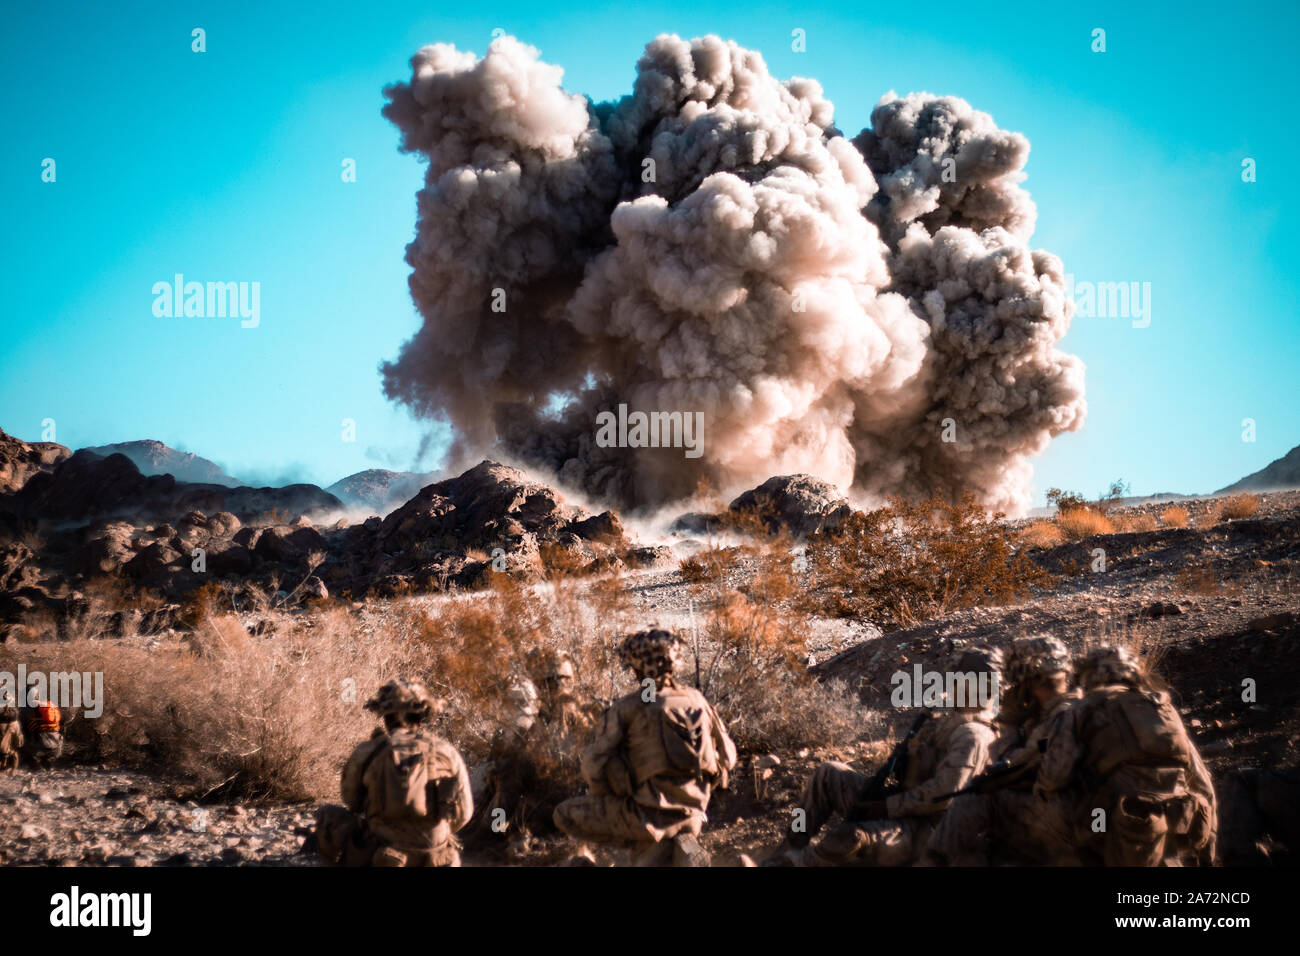 U.S. Marines with 1st Battalion, 6th Marine Regiment, 2nd Marine Division detonate Bangalore Torpedoes during Integrated Training Exercise (ITX) 1-20, at Marine Corps Air Ground Combat Center, Twentynine Palms, Calif., Oct. 12, 2019. The purpose of ITX 1-20 is to create a challenging, realistic training environment that produces combat-ready forces capable of operating as an integrated Marine Air Ground Task Force (MAGTF) and to prepare units to participate in the MAGTF warfighting exercise scheduled to be held early November.  (U.S. Marine Corps photo by Lance Cpl. Shane T. Beaubien) Stock Photo